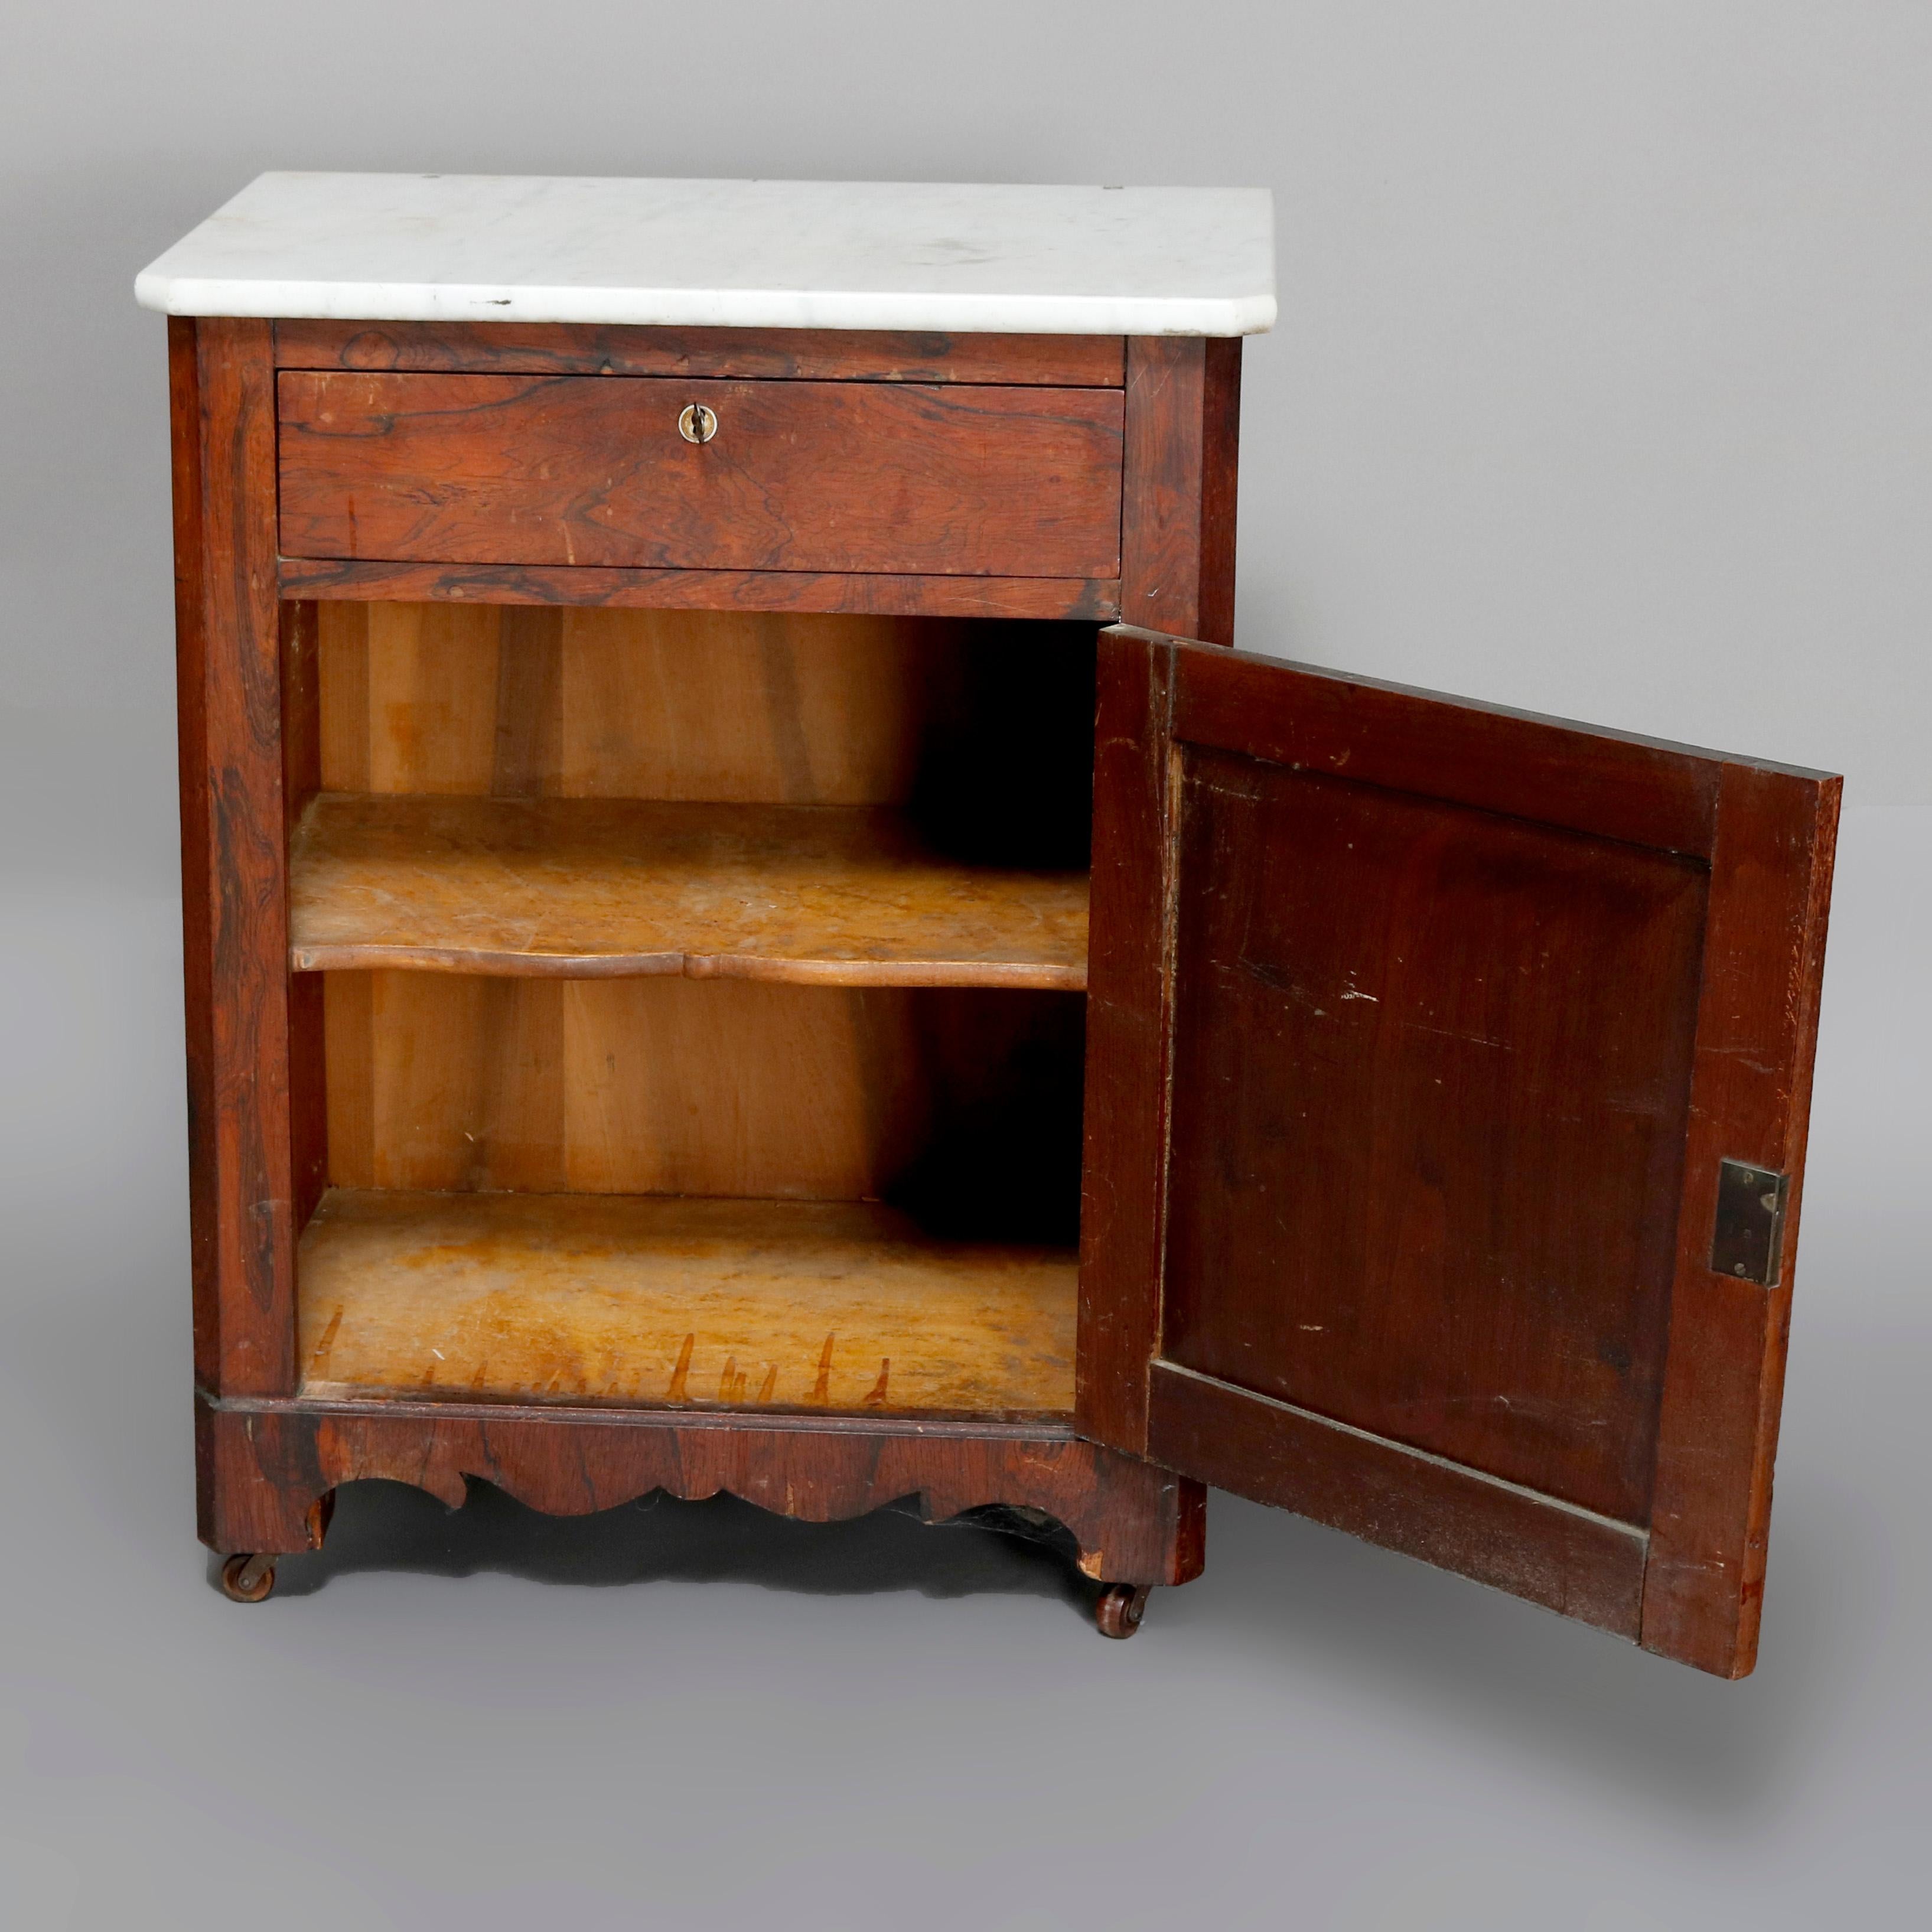 An antique Victorian half-commode offers marble top surmounting burl case with single upper drawer and lower shelved cabinet over shaped skirt and seated on casters, 19th century

Measures: 30